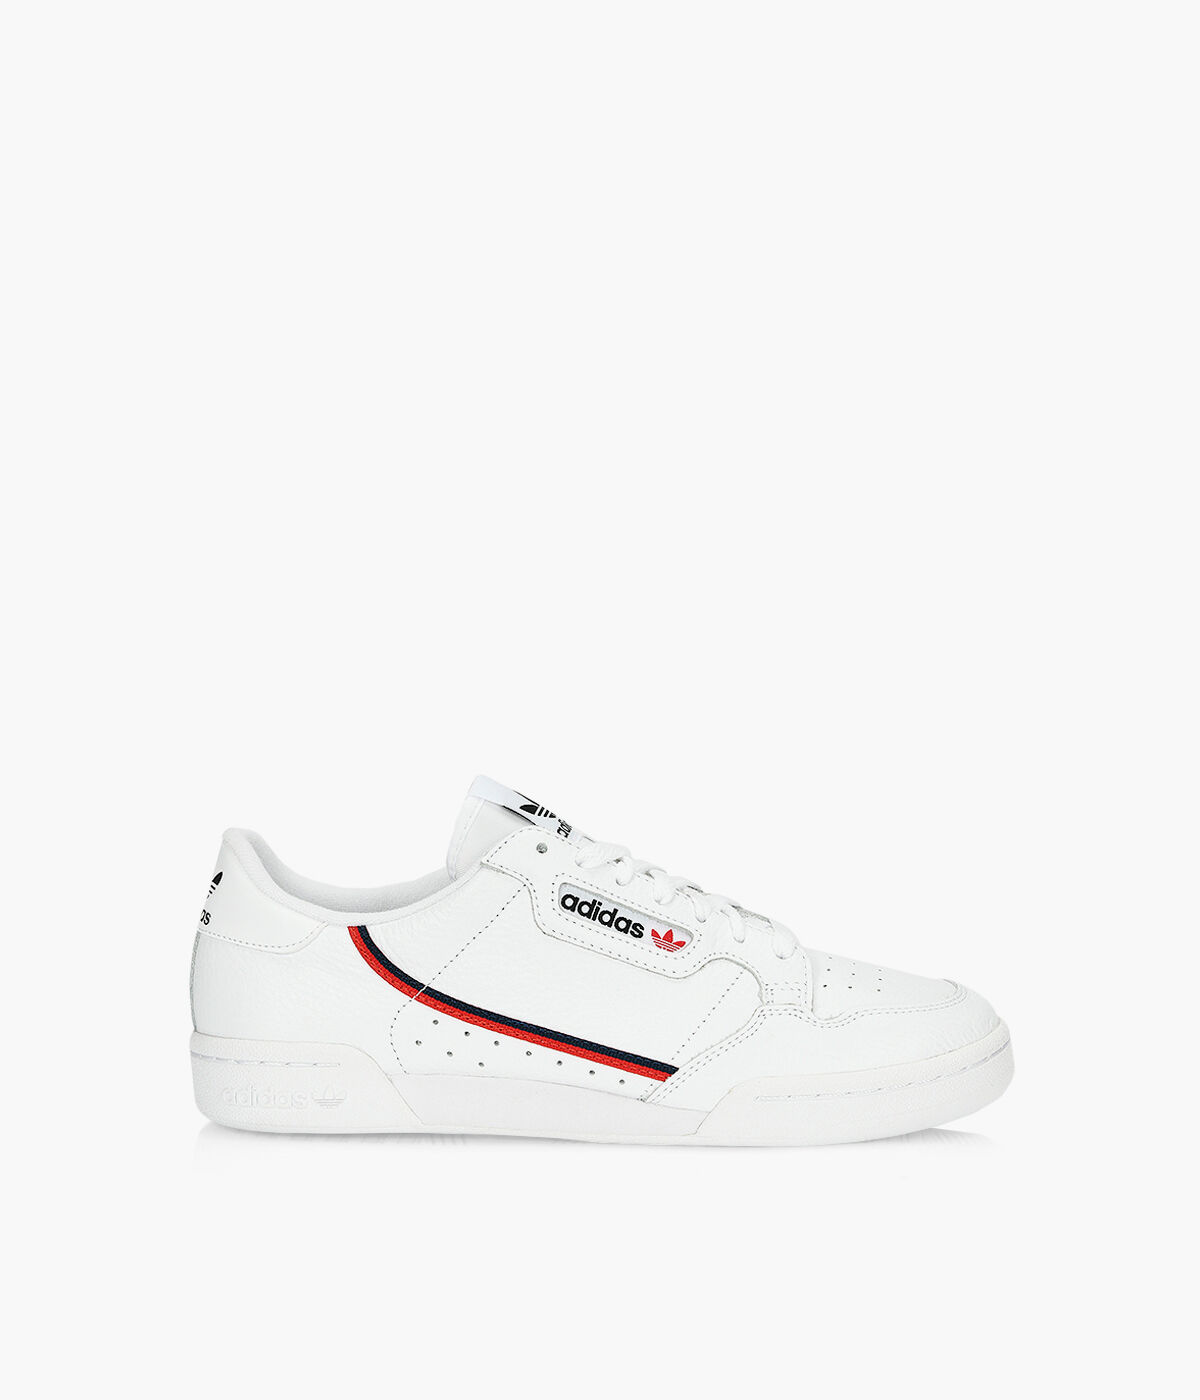 adidas continental shoes